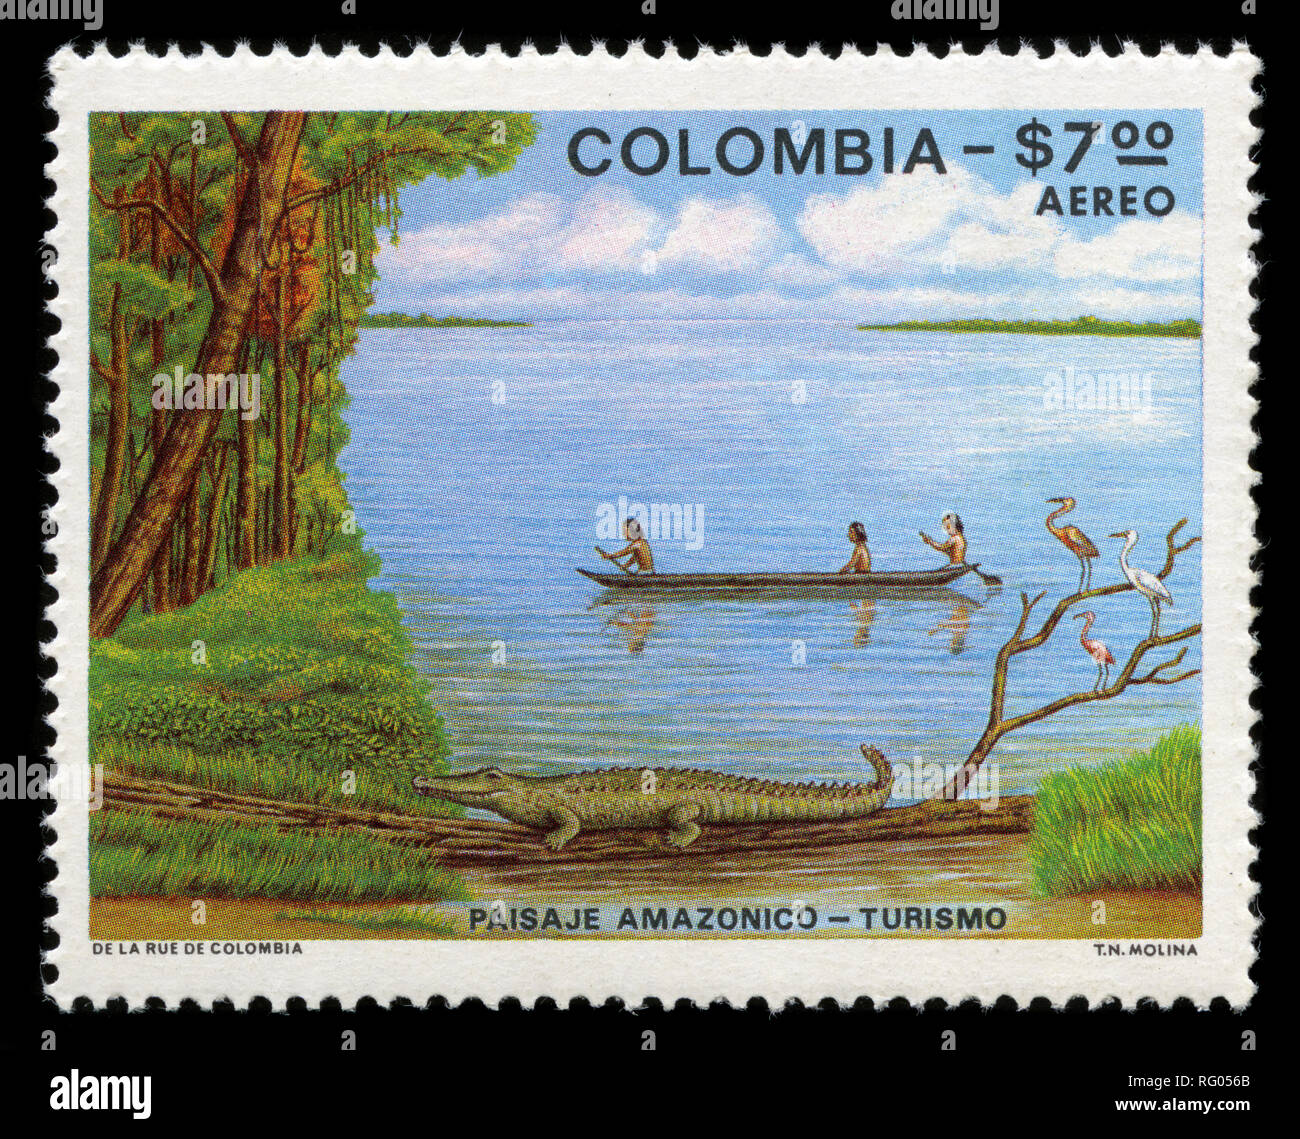 Postage stamp from Colombia in the Tourism series issued in 1979 Stock Photo